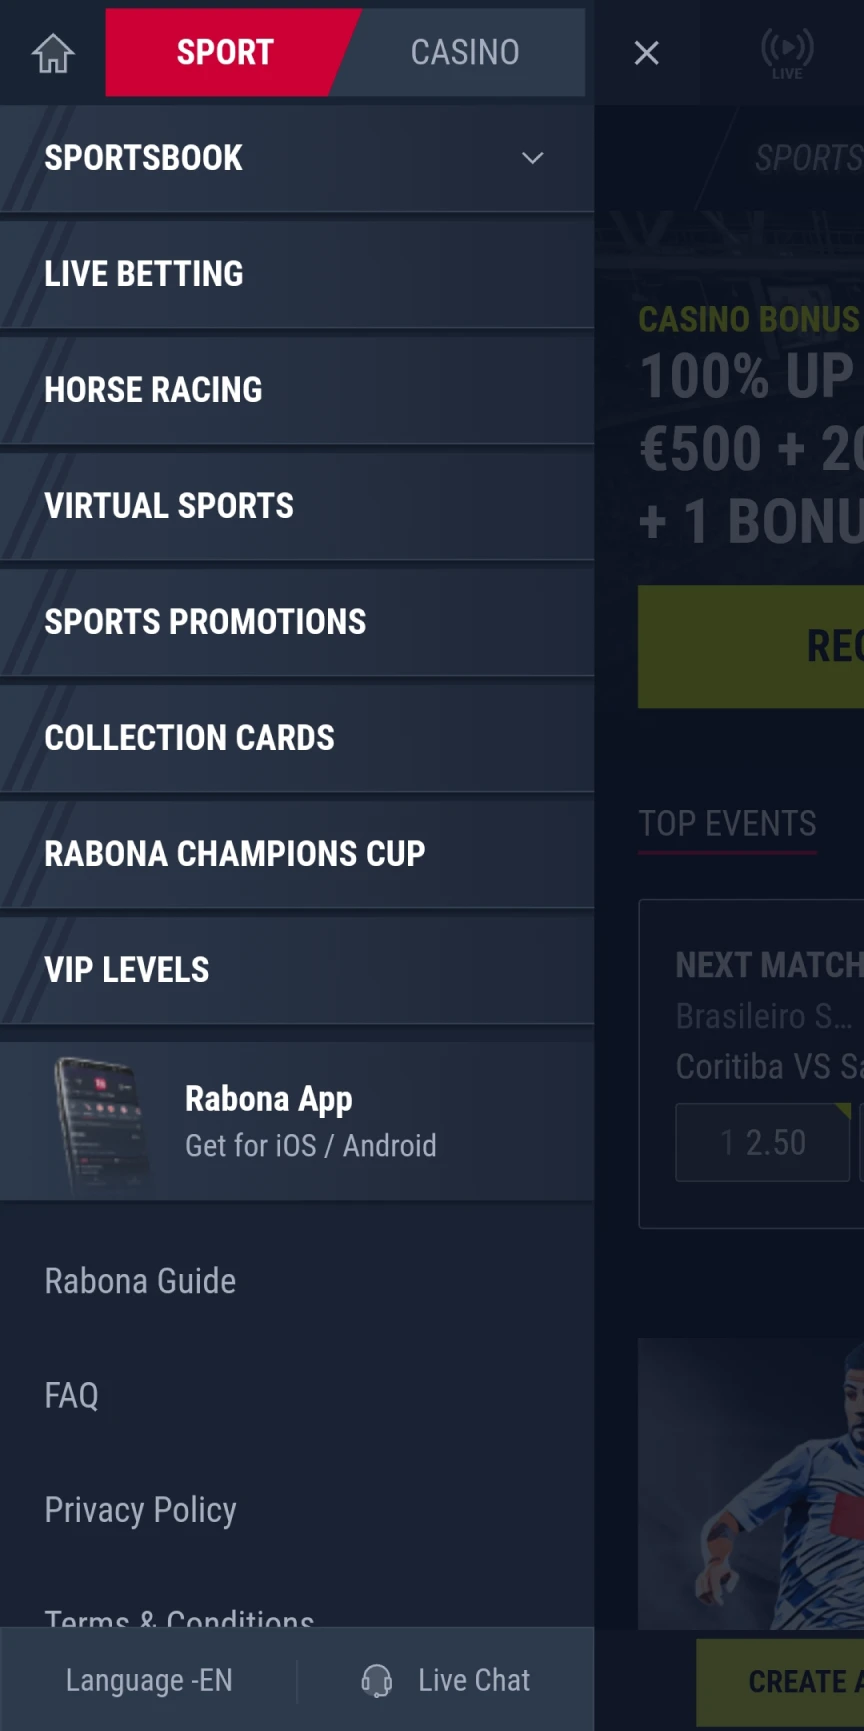 Download the Rabona app for iOS.